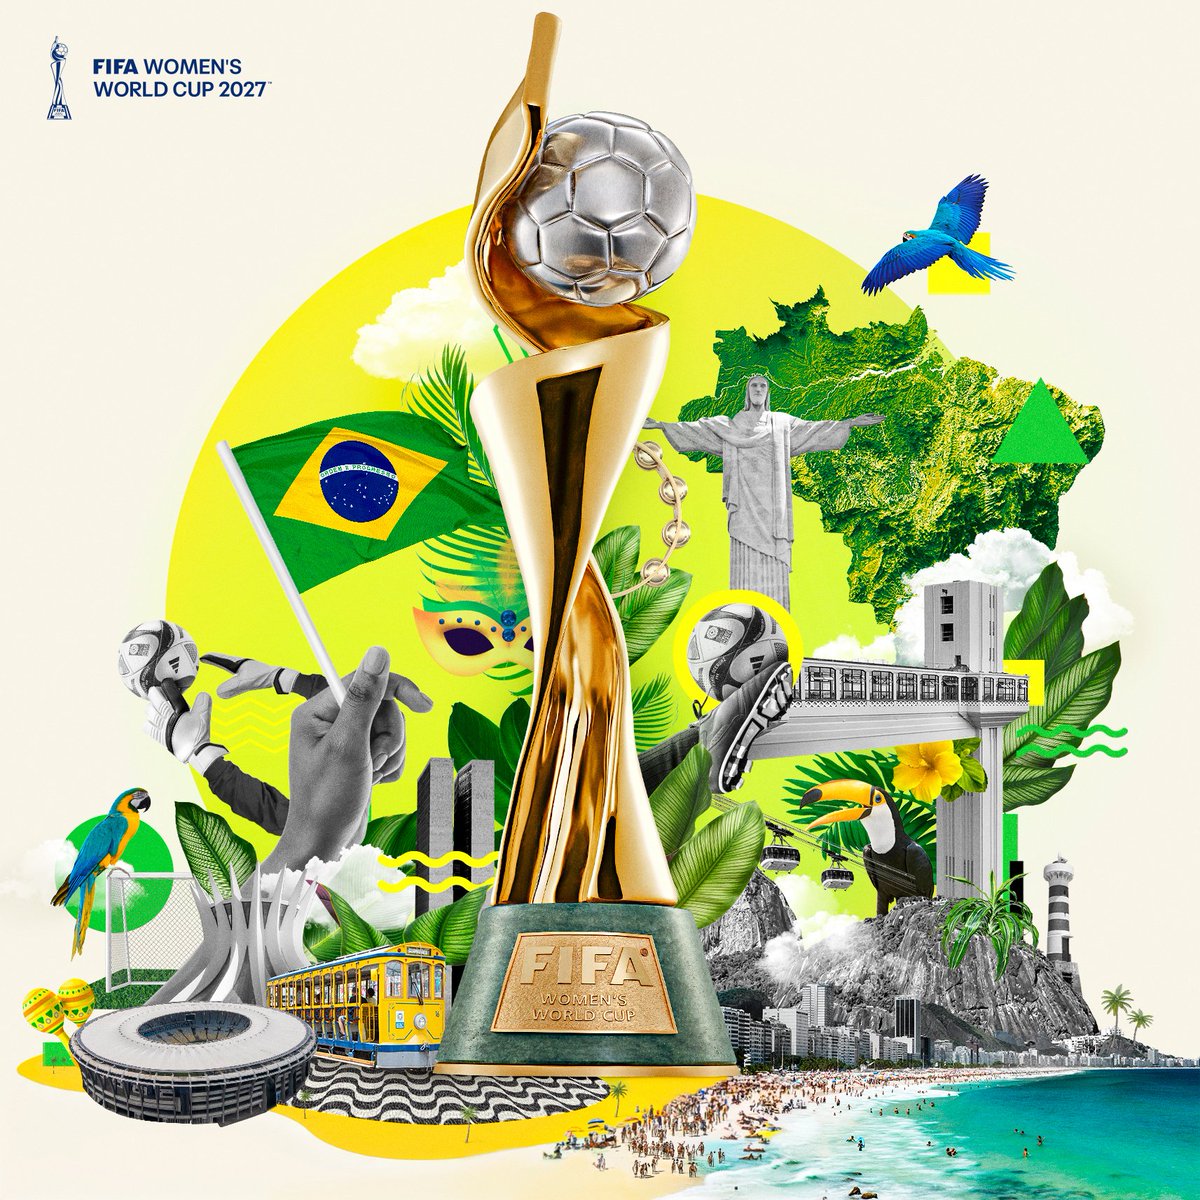 The 2027 #FIFAWWC will be hosted by Brazil! 🤩🇧🇷